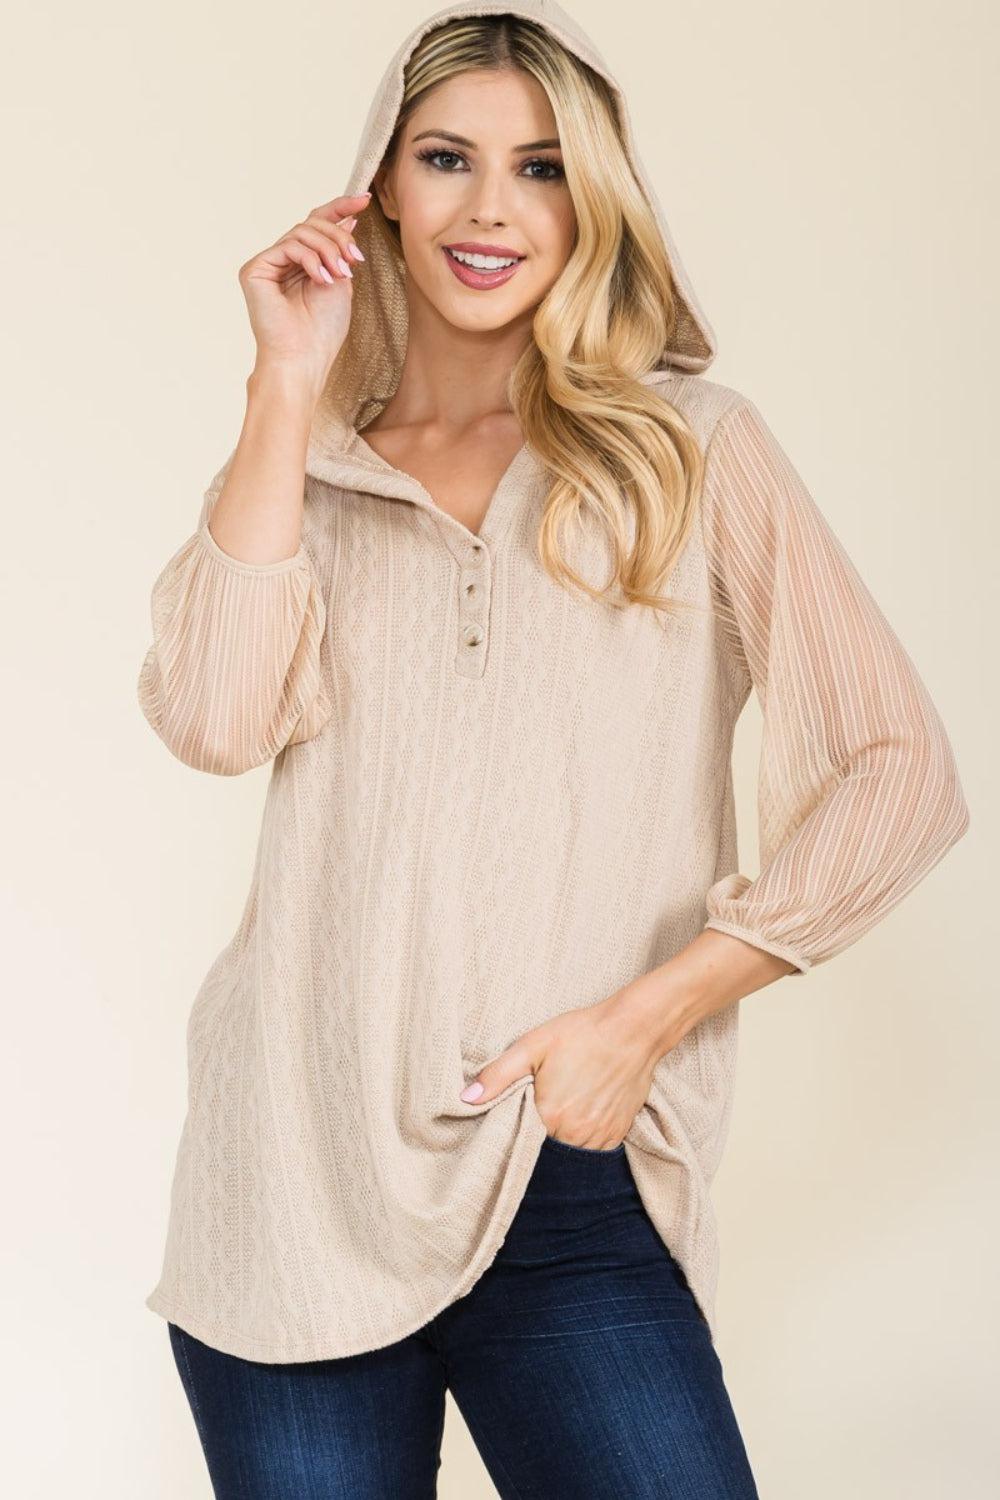 a woman wearing a beige sweater and jeans